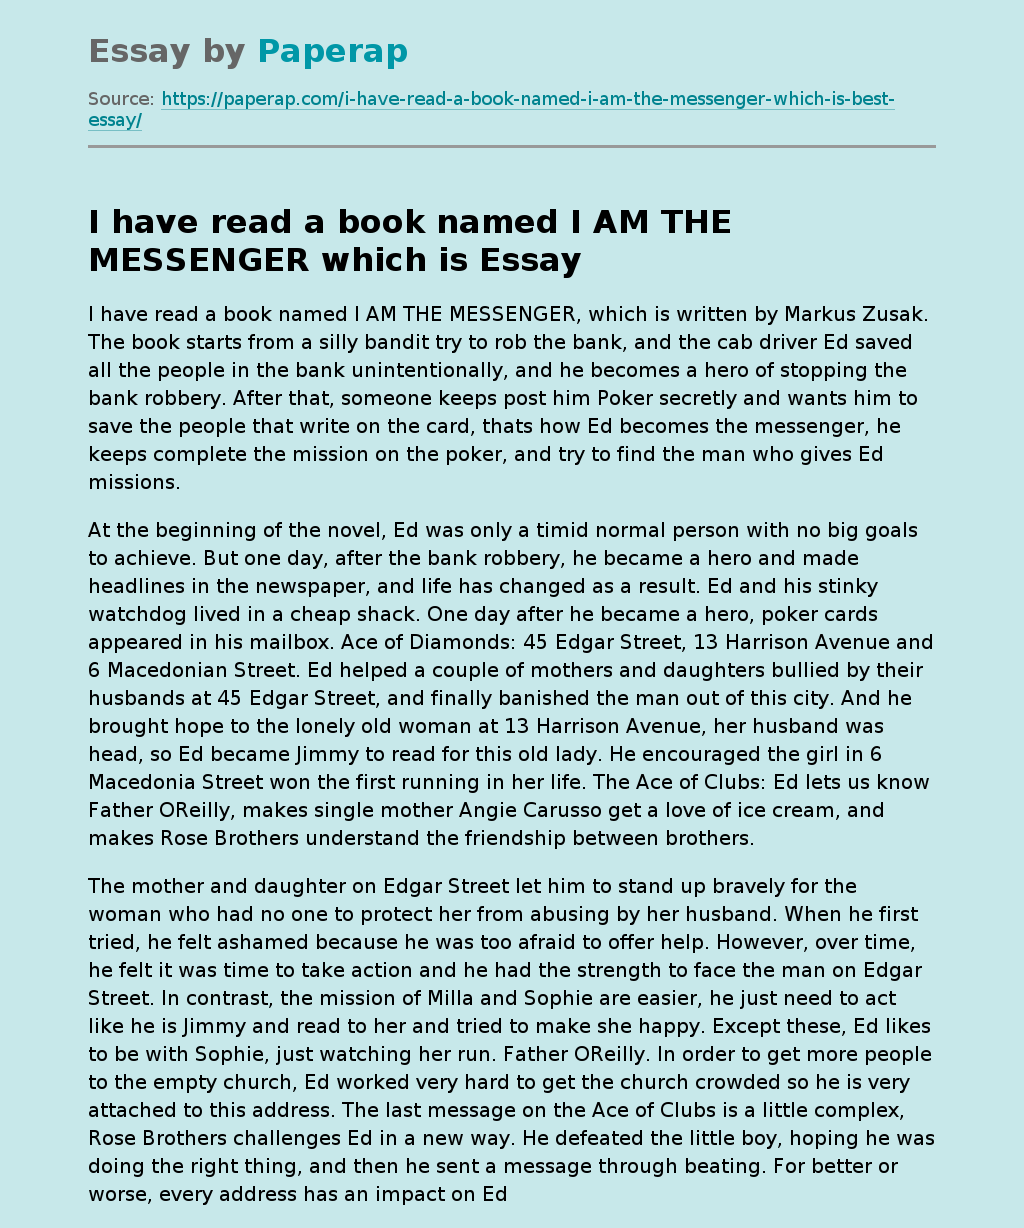 I have read a book named I AM THE MESSENGER which is